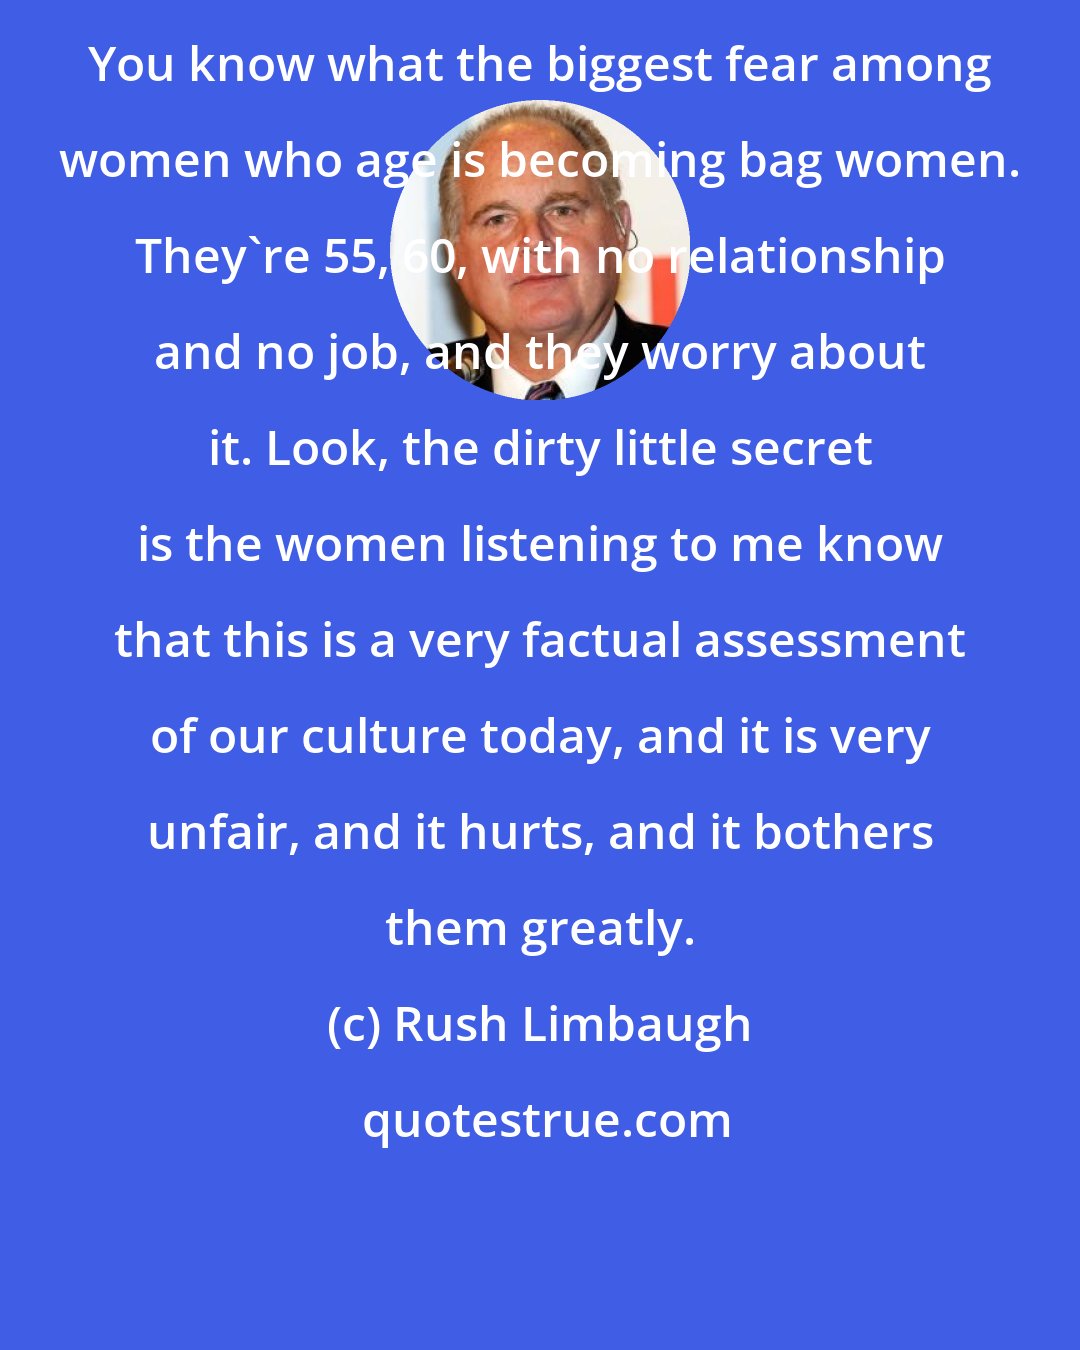 Rush Limbaugh: You know what the biggest fear among women who age is becoming bag women. They're 55, 60, with no relationship and no job, and they worry about it. Look, the dirty little secret is the women listening to me know that this is a very factual assessment of our culture today, and it is very unfair, and it hurts, and it bothers them greatly.